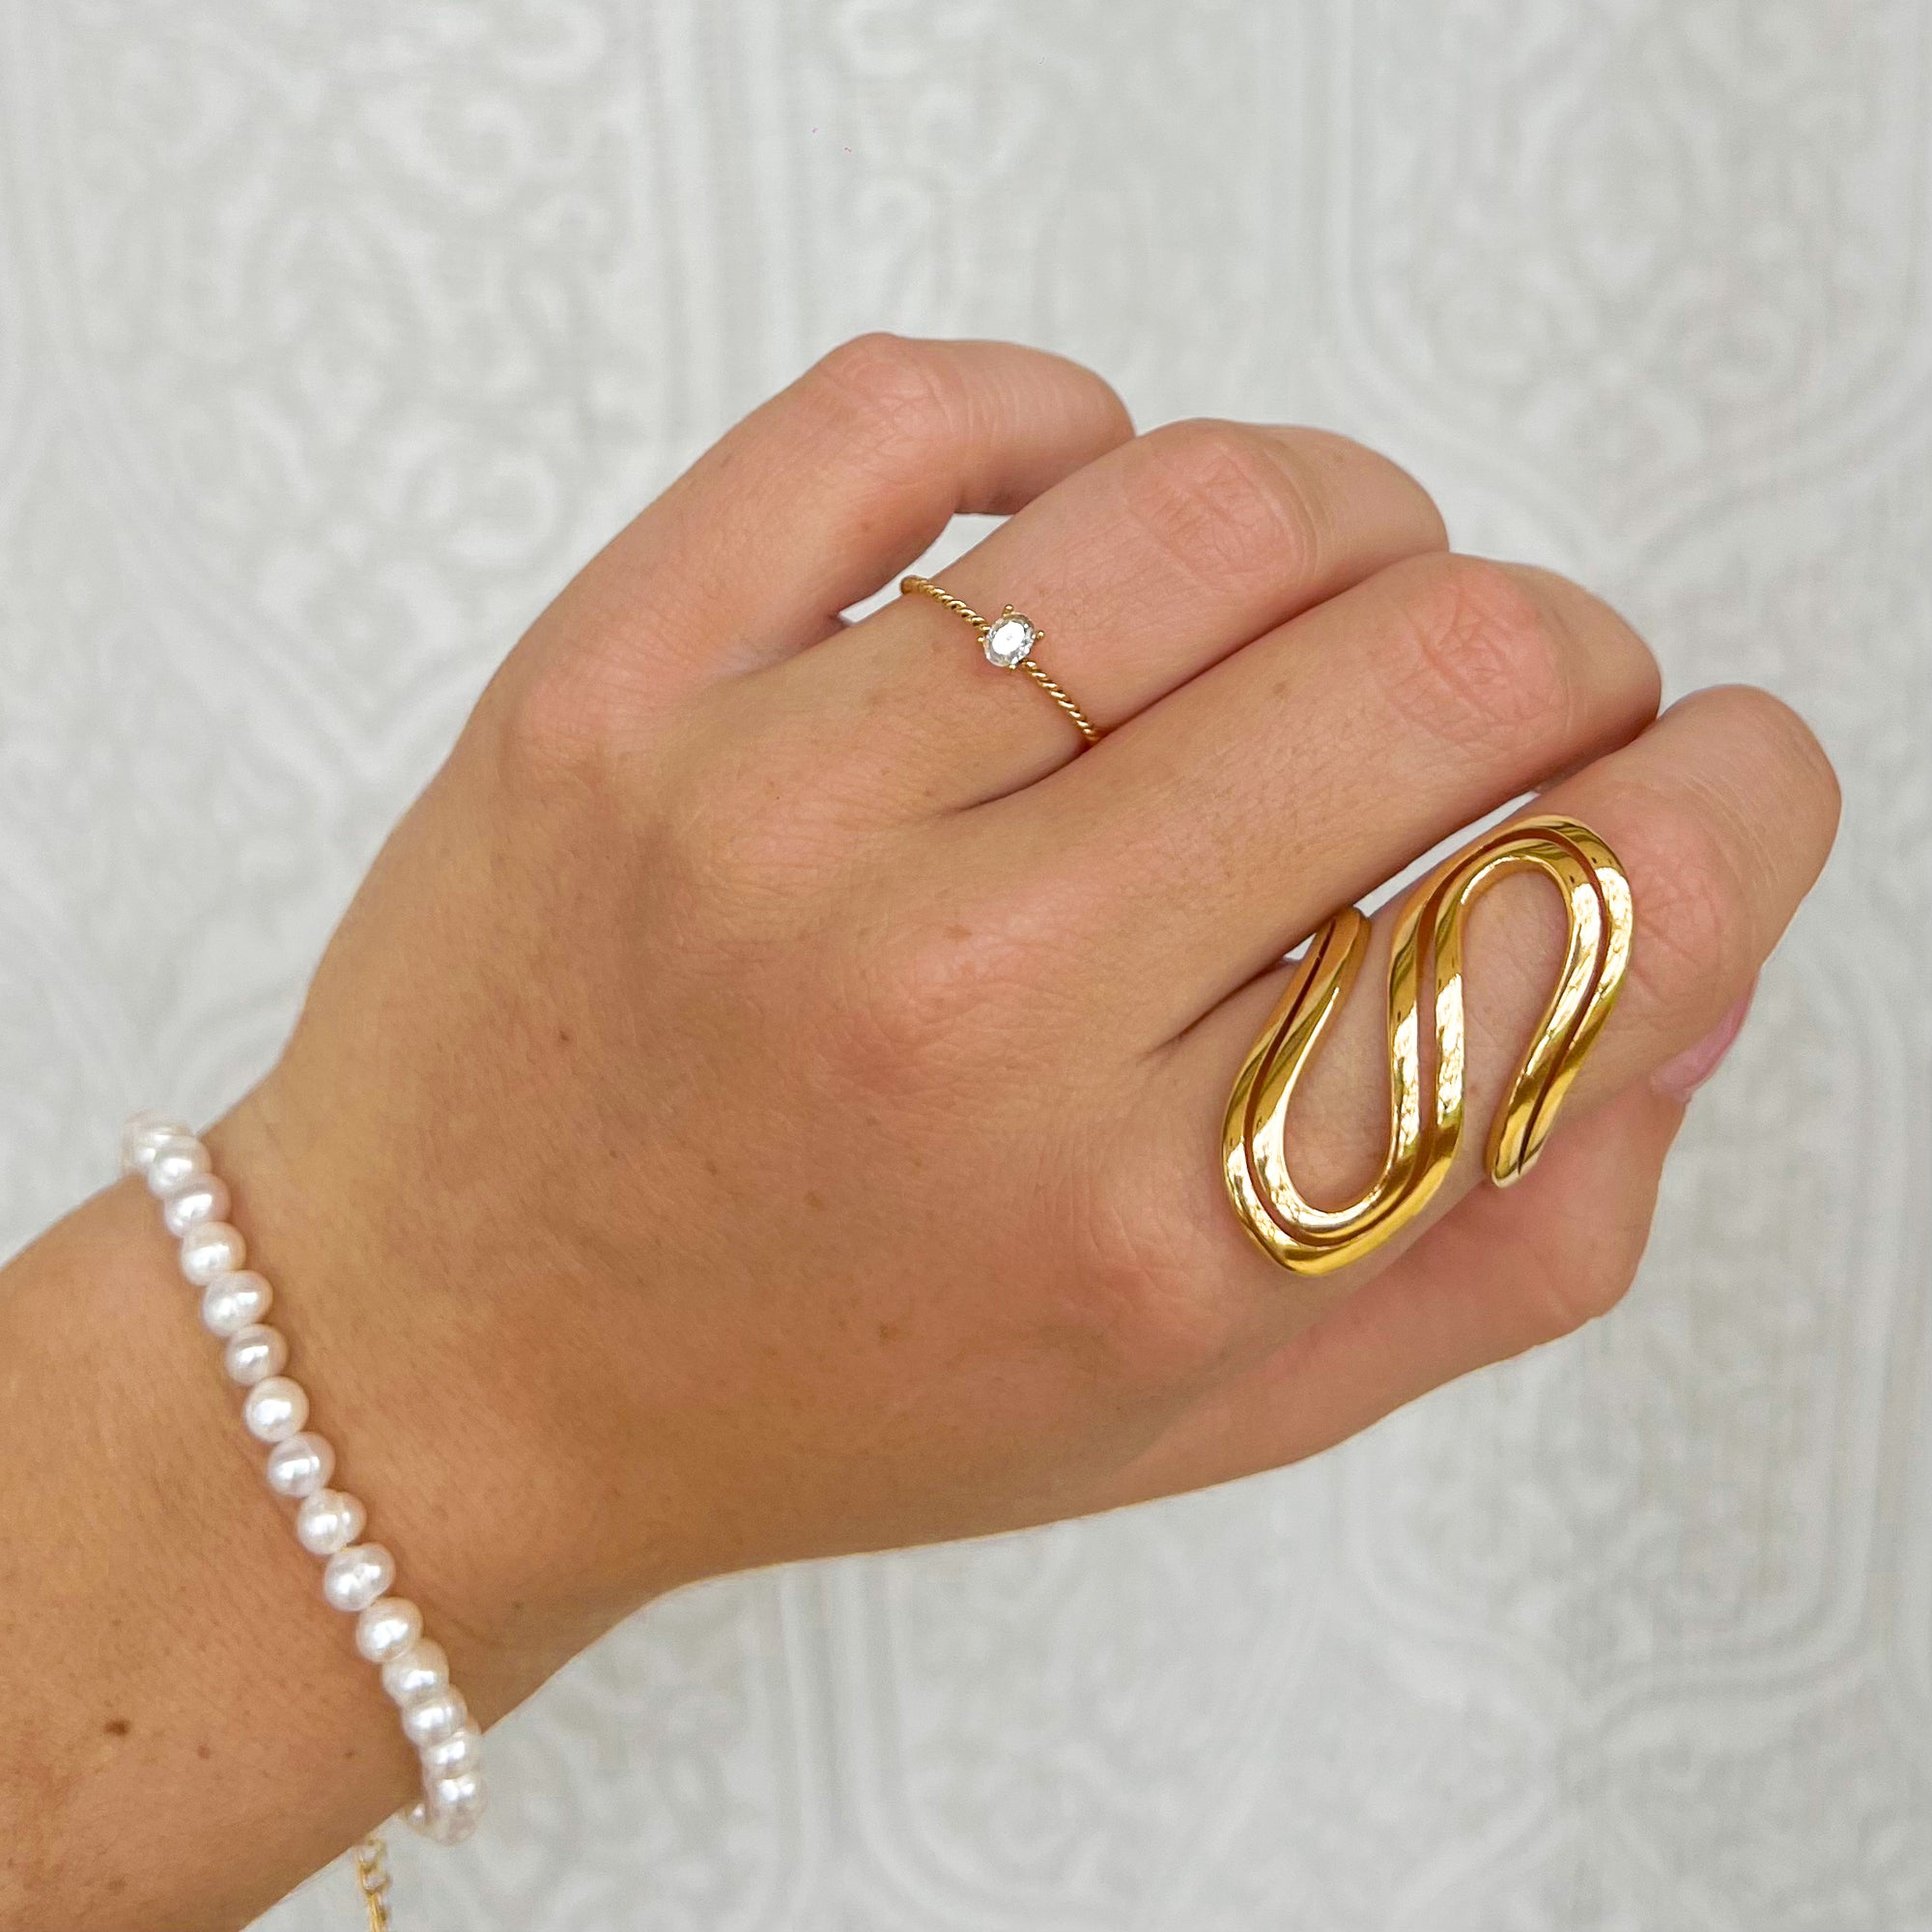 Twisted Elegance Ring - For the Girls Jewelry